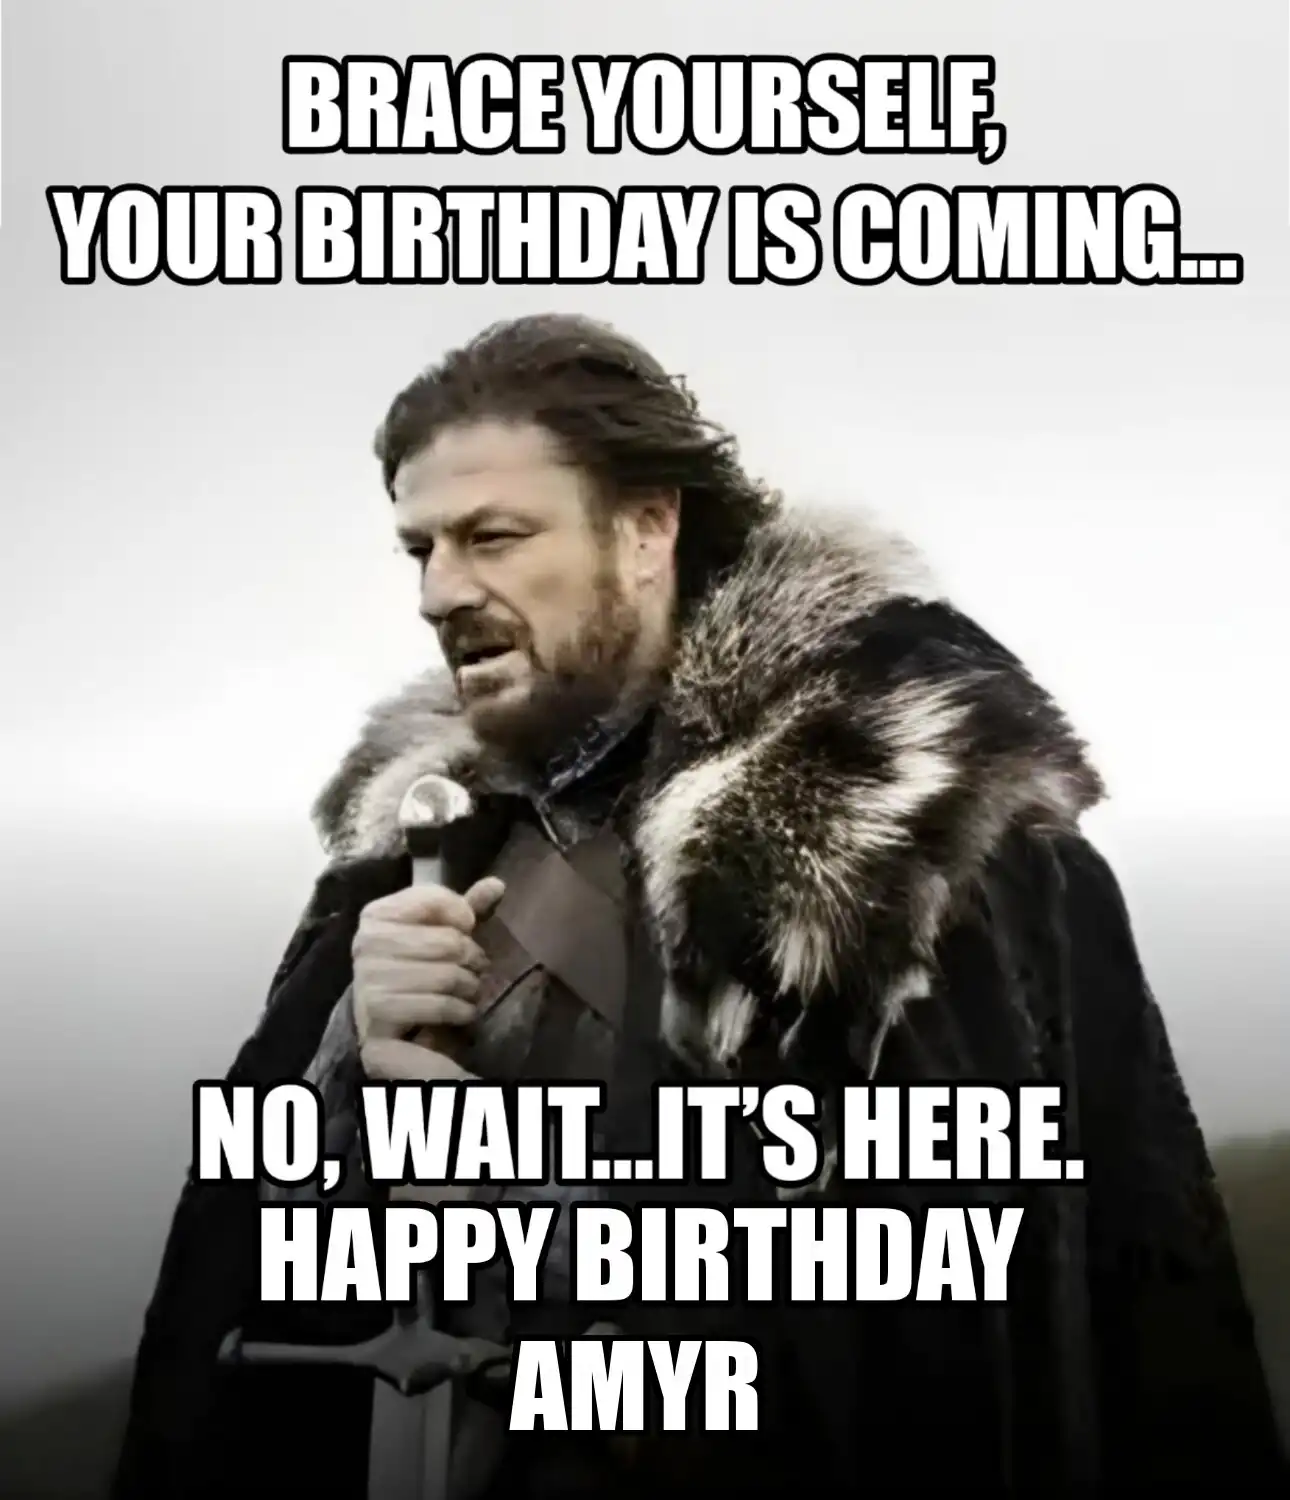 Happy Birthday Amyr Brace Yourself Your Birthday Is Coming Meme